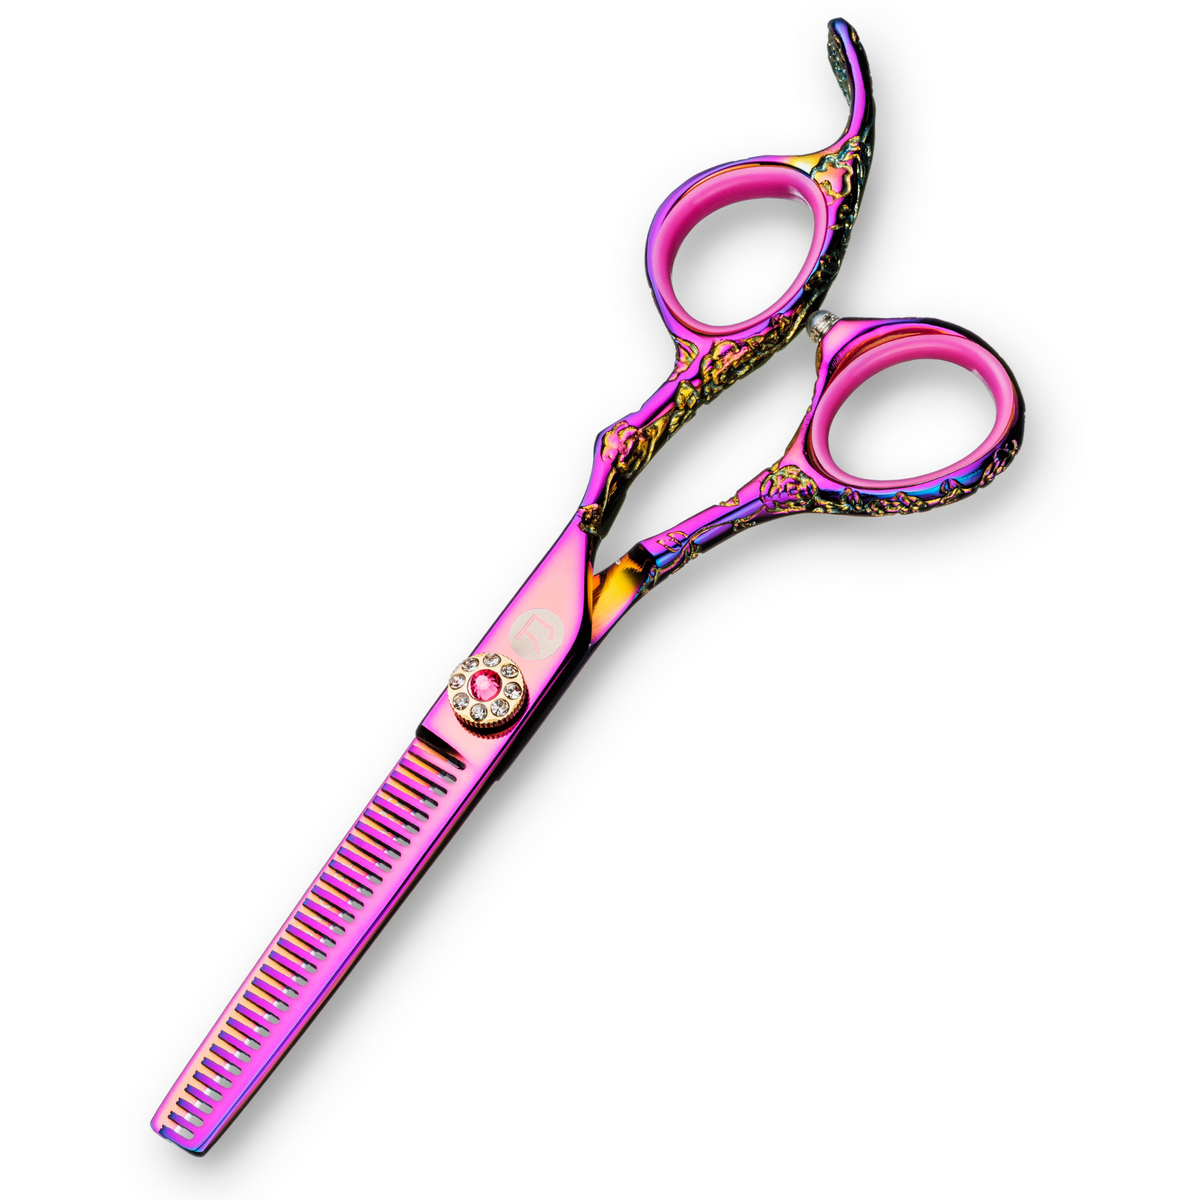 Pink Stylist Shears - Cotton Candy